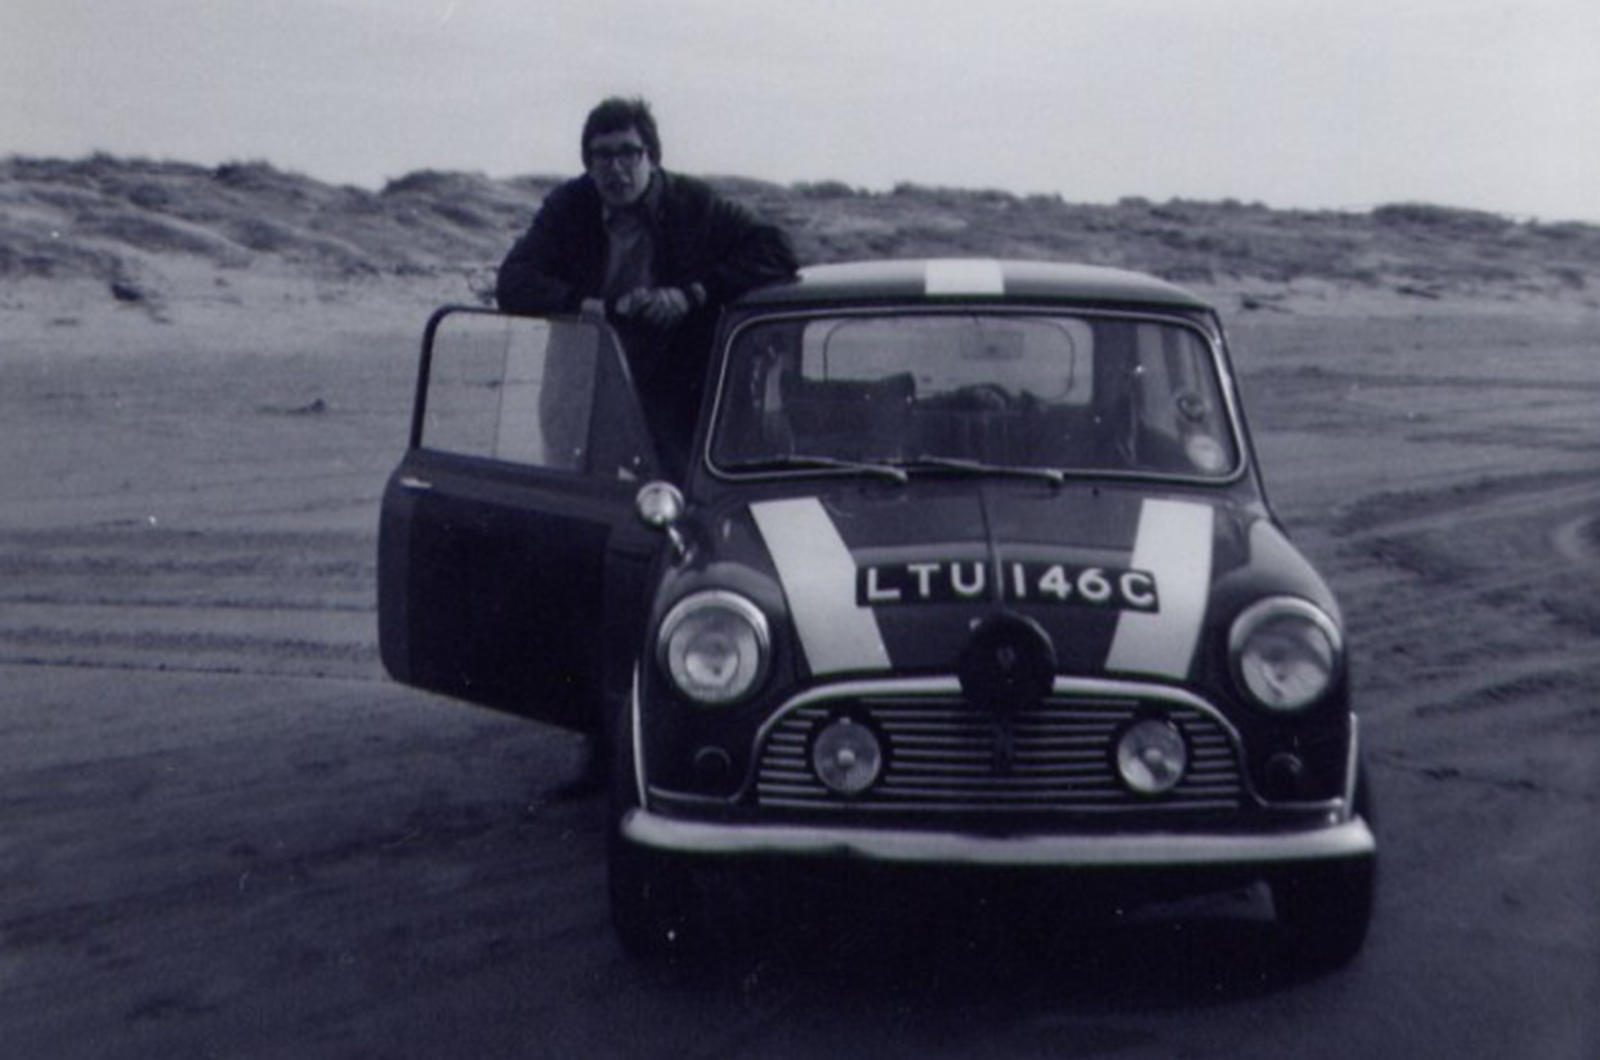 Classic & Sports Car – What makes the Mini so marvellous? You tell us!